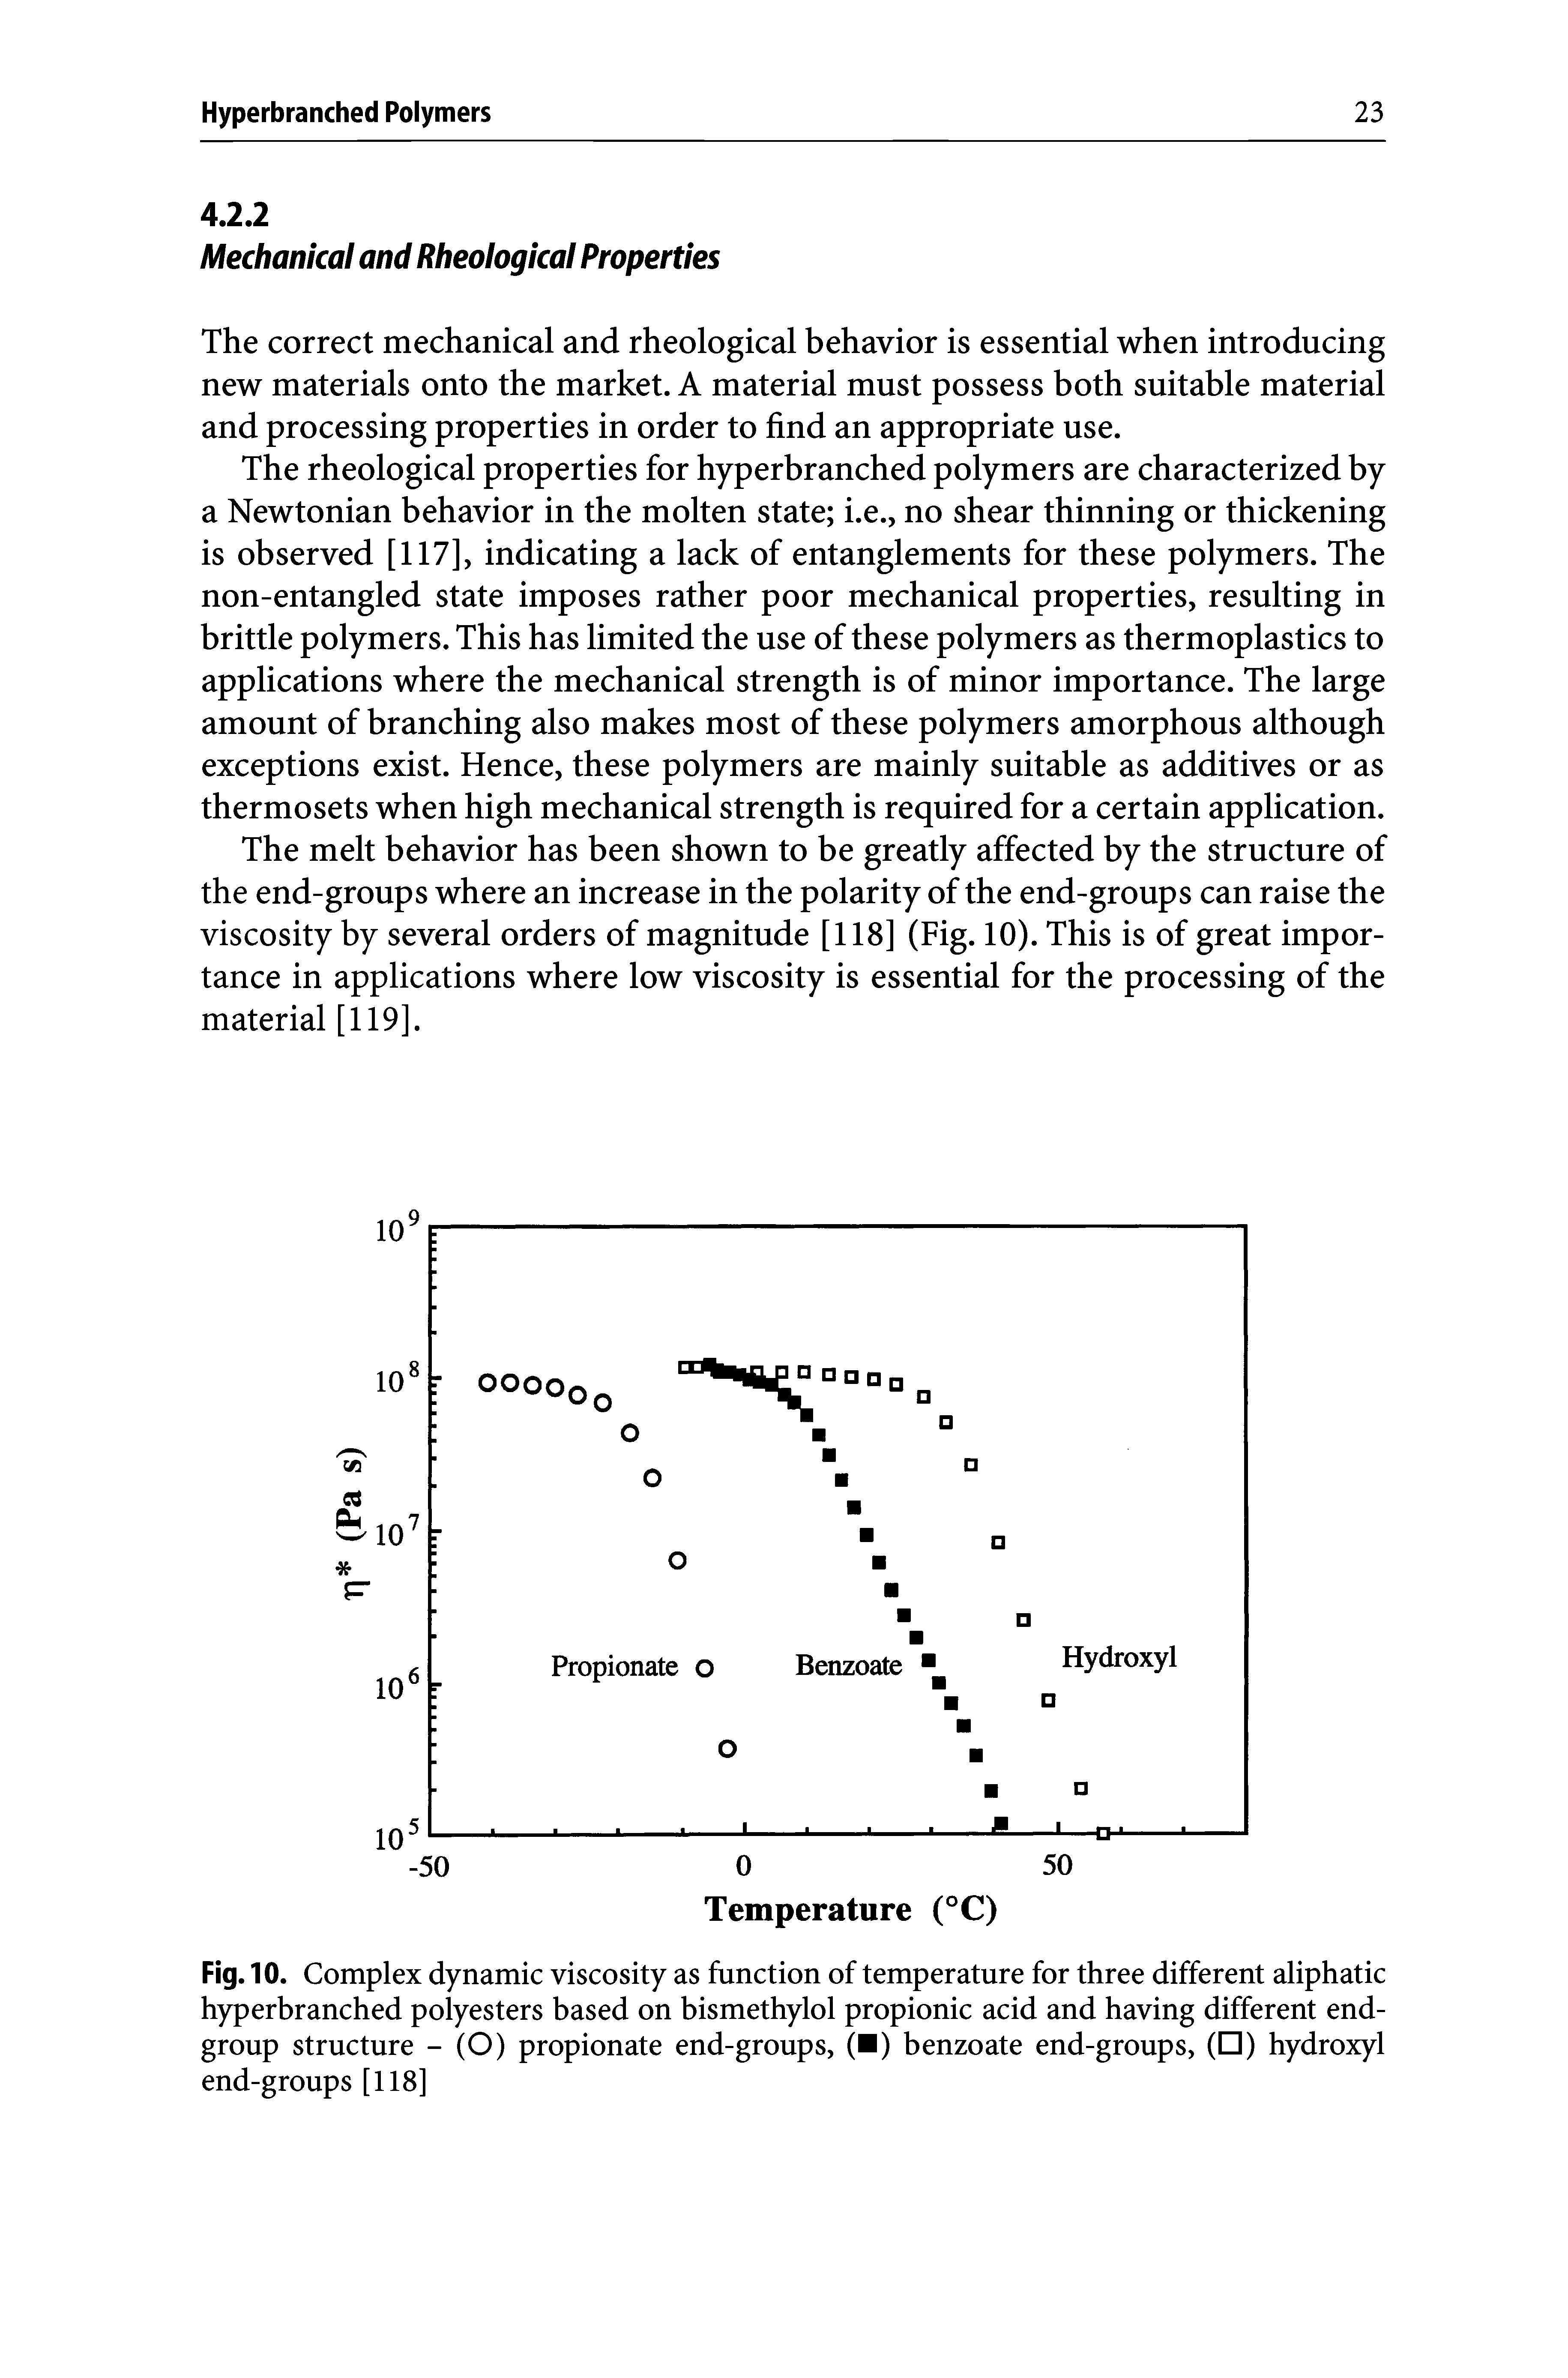 Fig. 10. Complex dynamic viscosity as function of temperature for three different aliphatic hyperbranched polyesters based on bismethylol propionic acid and having different end-group structure - (O) propionate end-groups, ( ) benzoate end-groups, ( ) hydroxyl end-groups [118]...